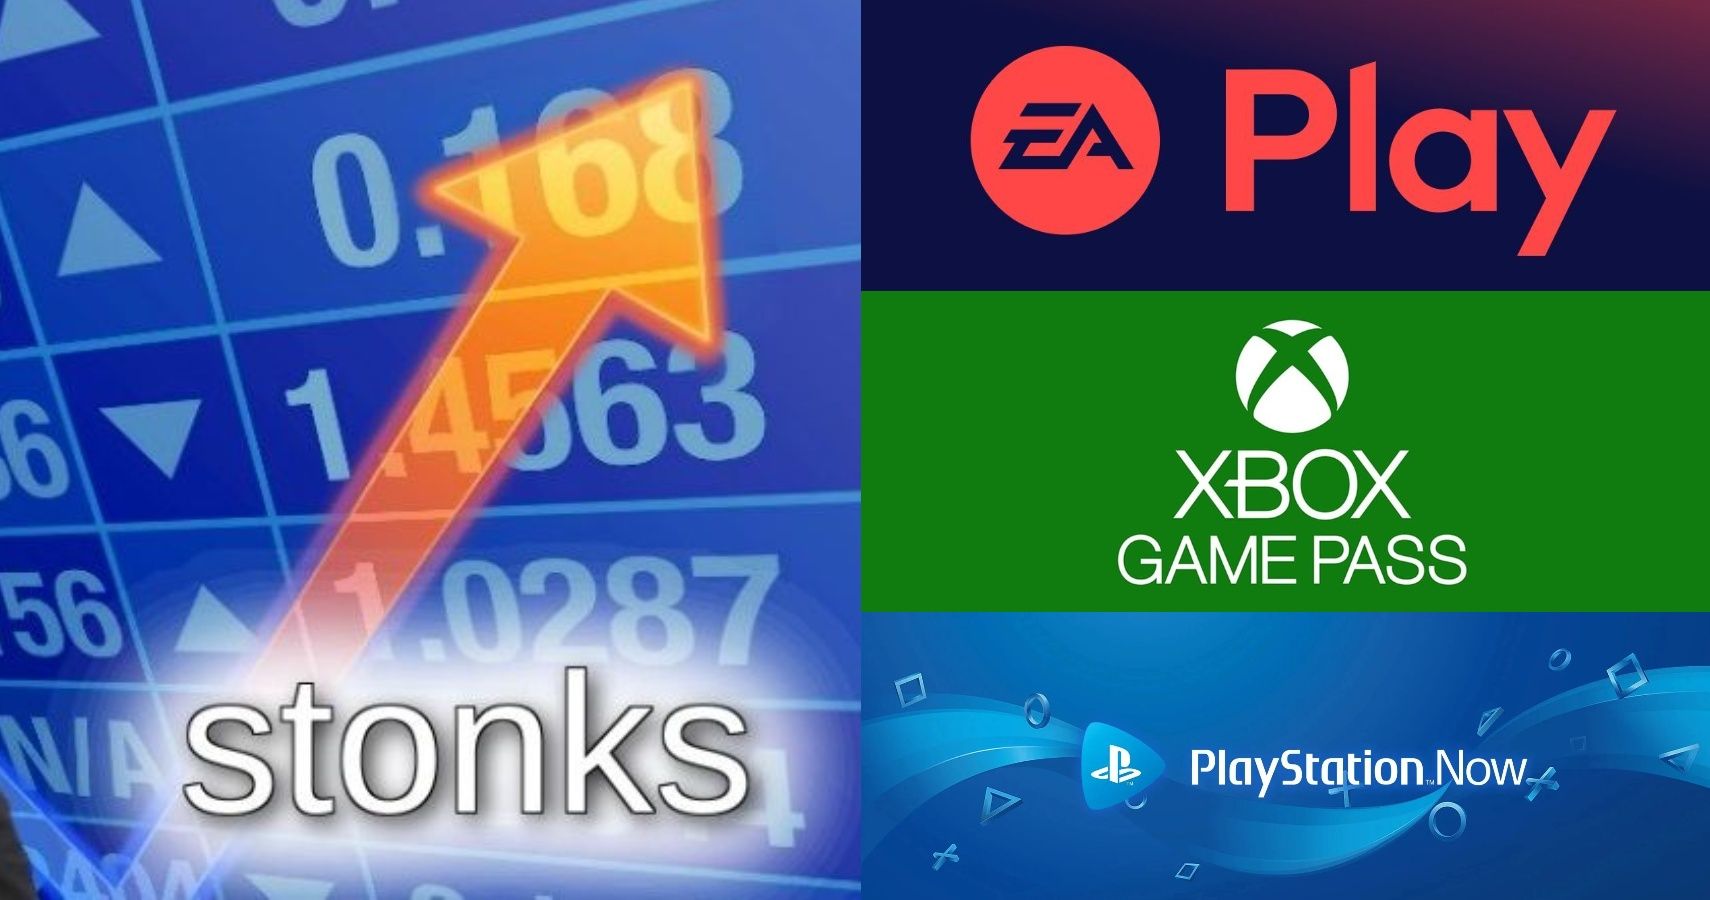 ea play no game pass pc data